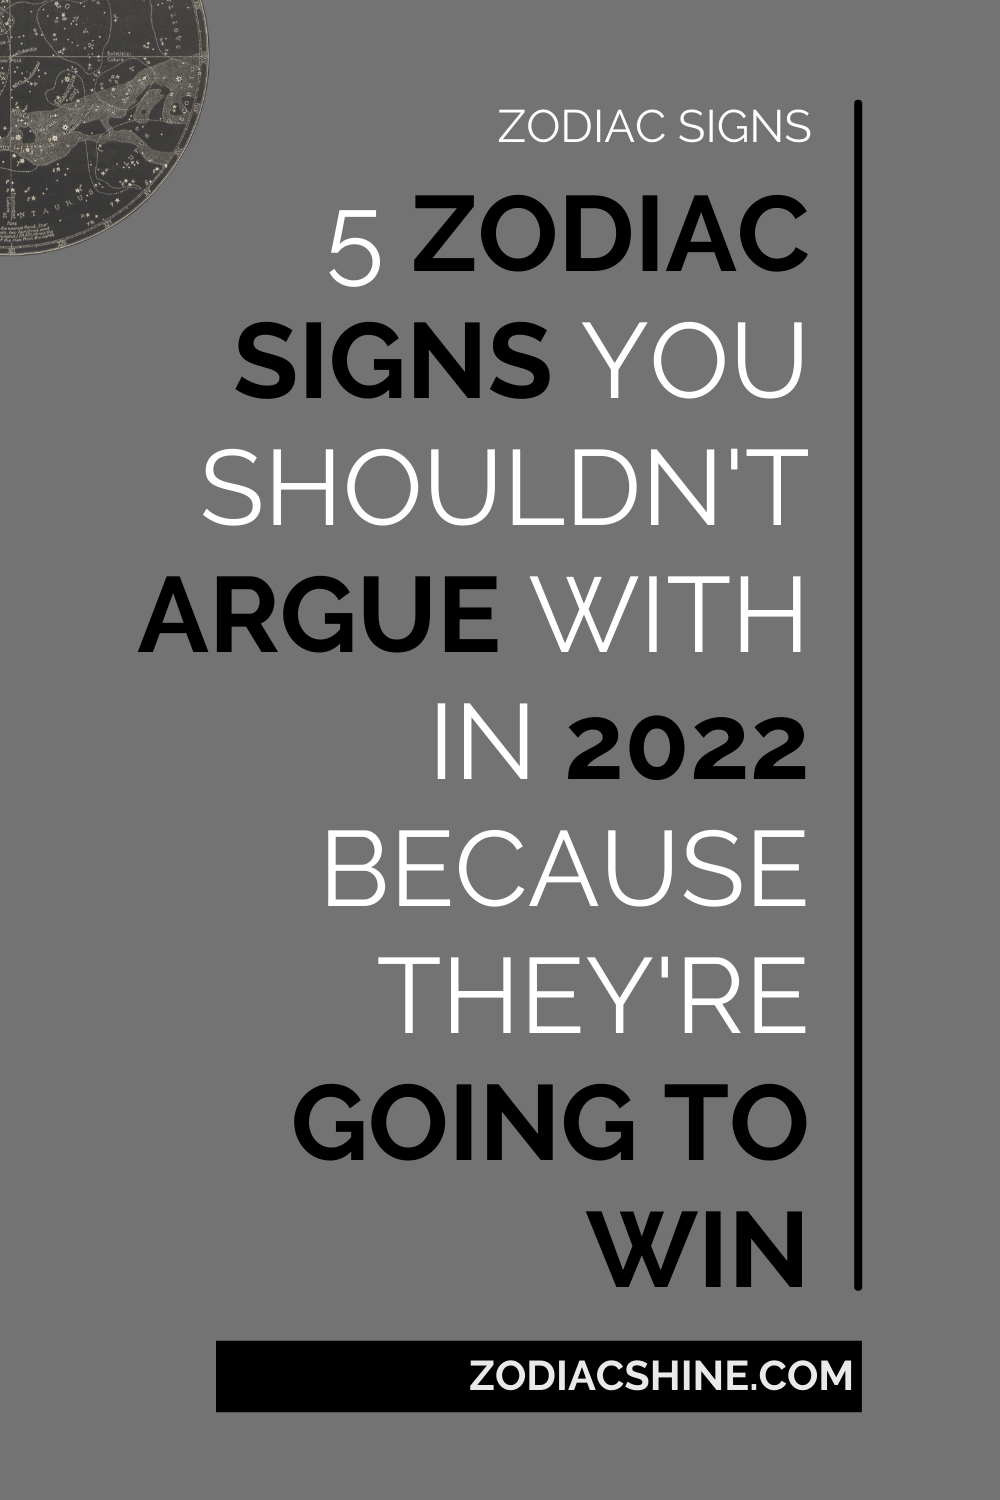 5 Zodiac Signs You Shouldn't Argue With In 2022 Because They're Going To Win